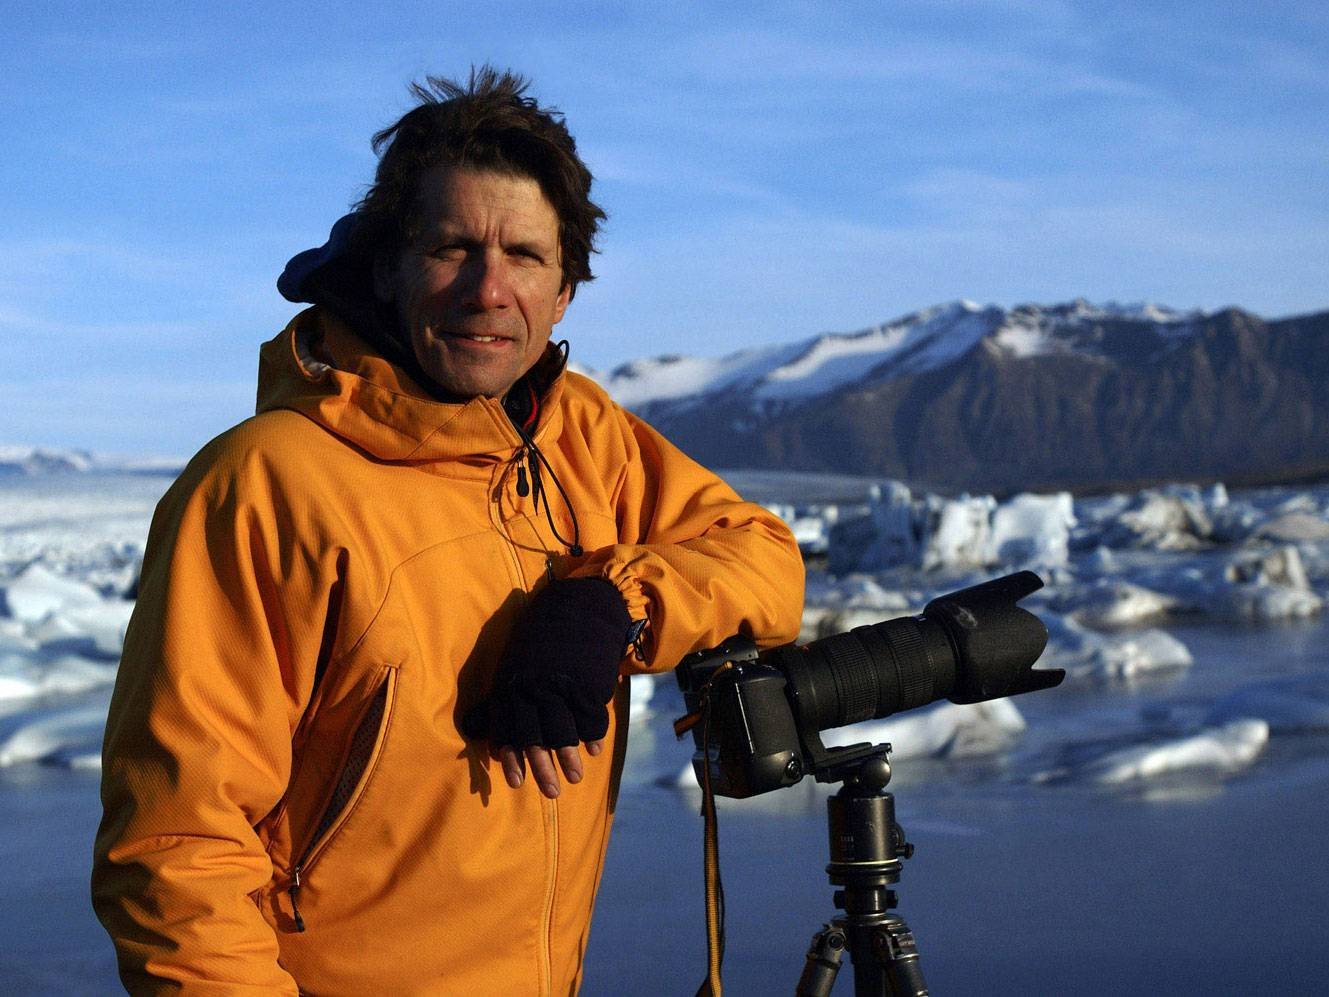 James Balog stands next to camera in arctic environment